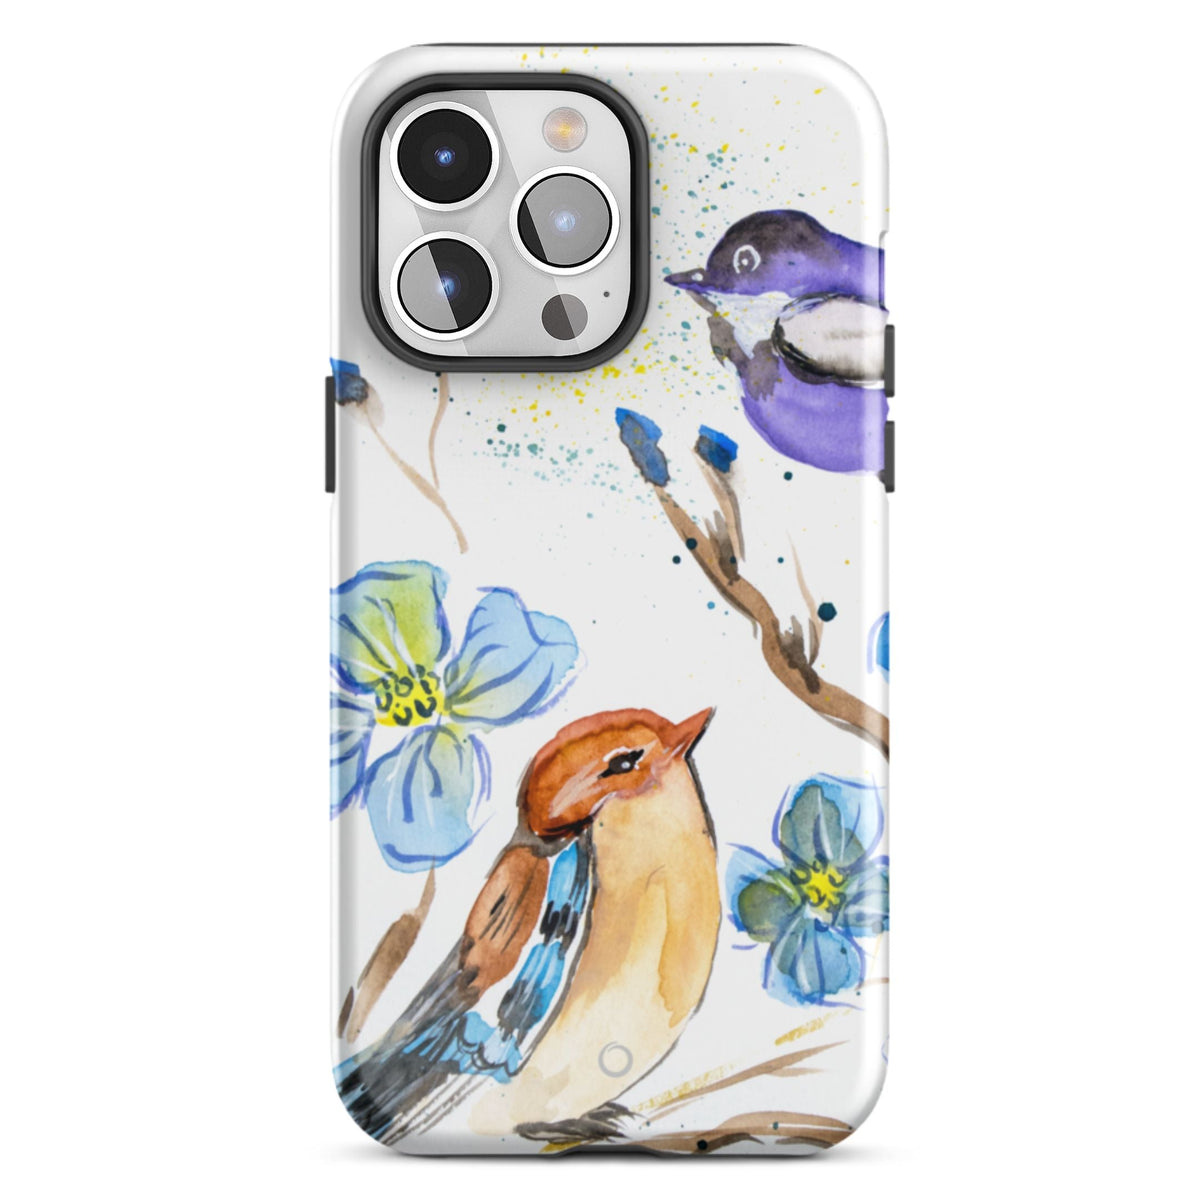 Winged Duets iPhone Case - iPhone 12 Pro Max